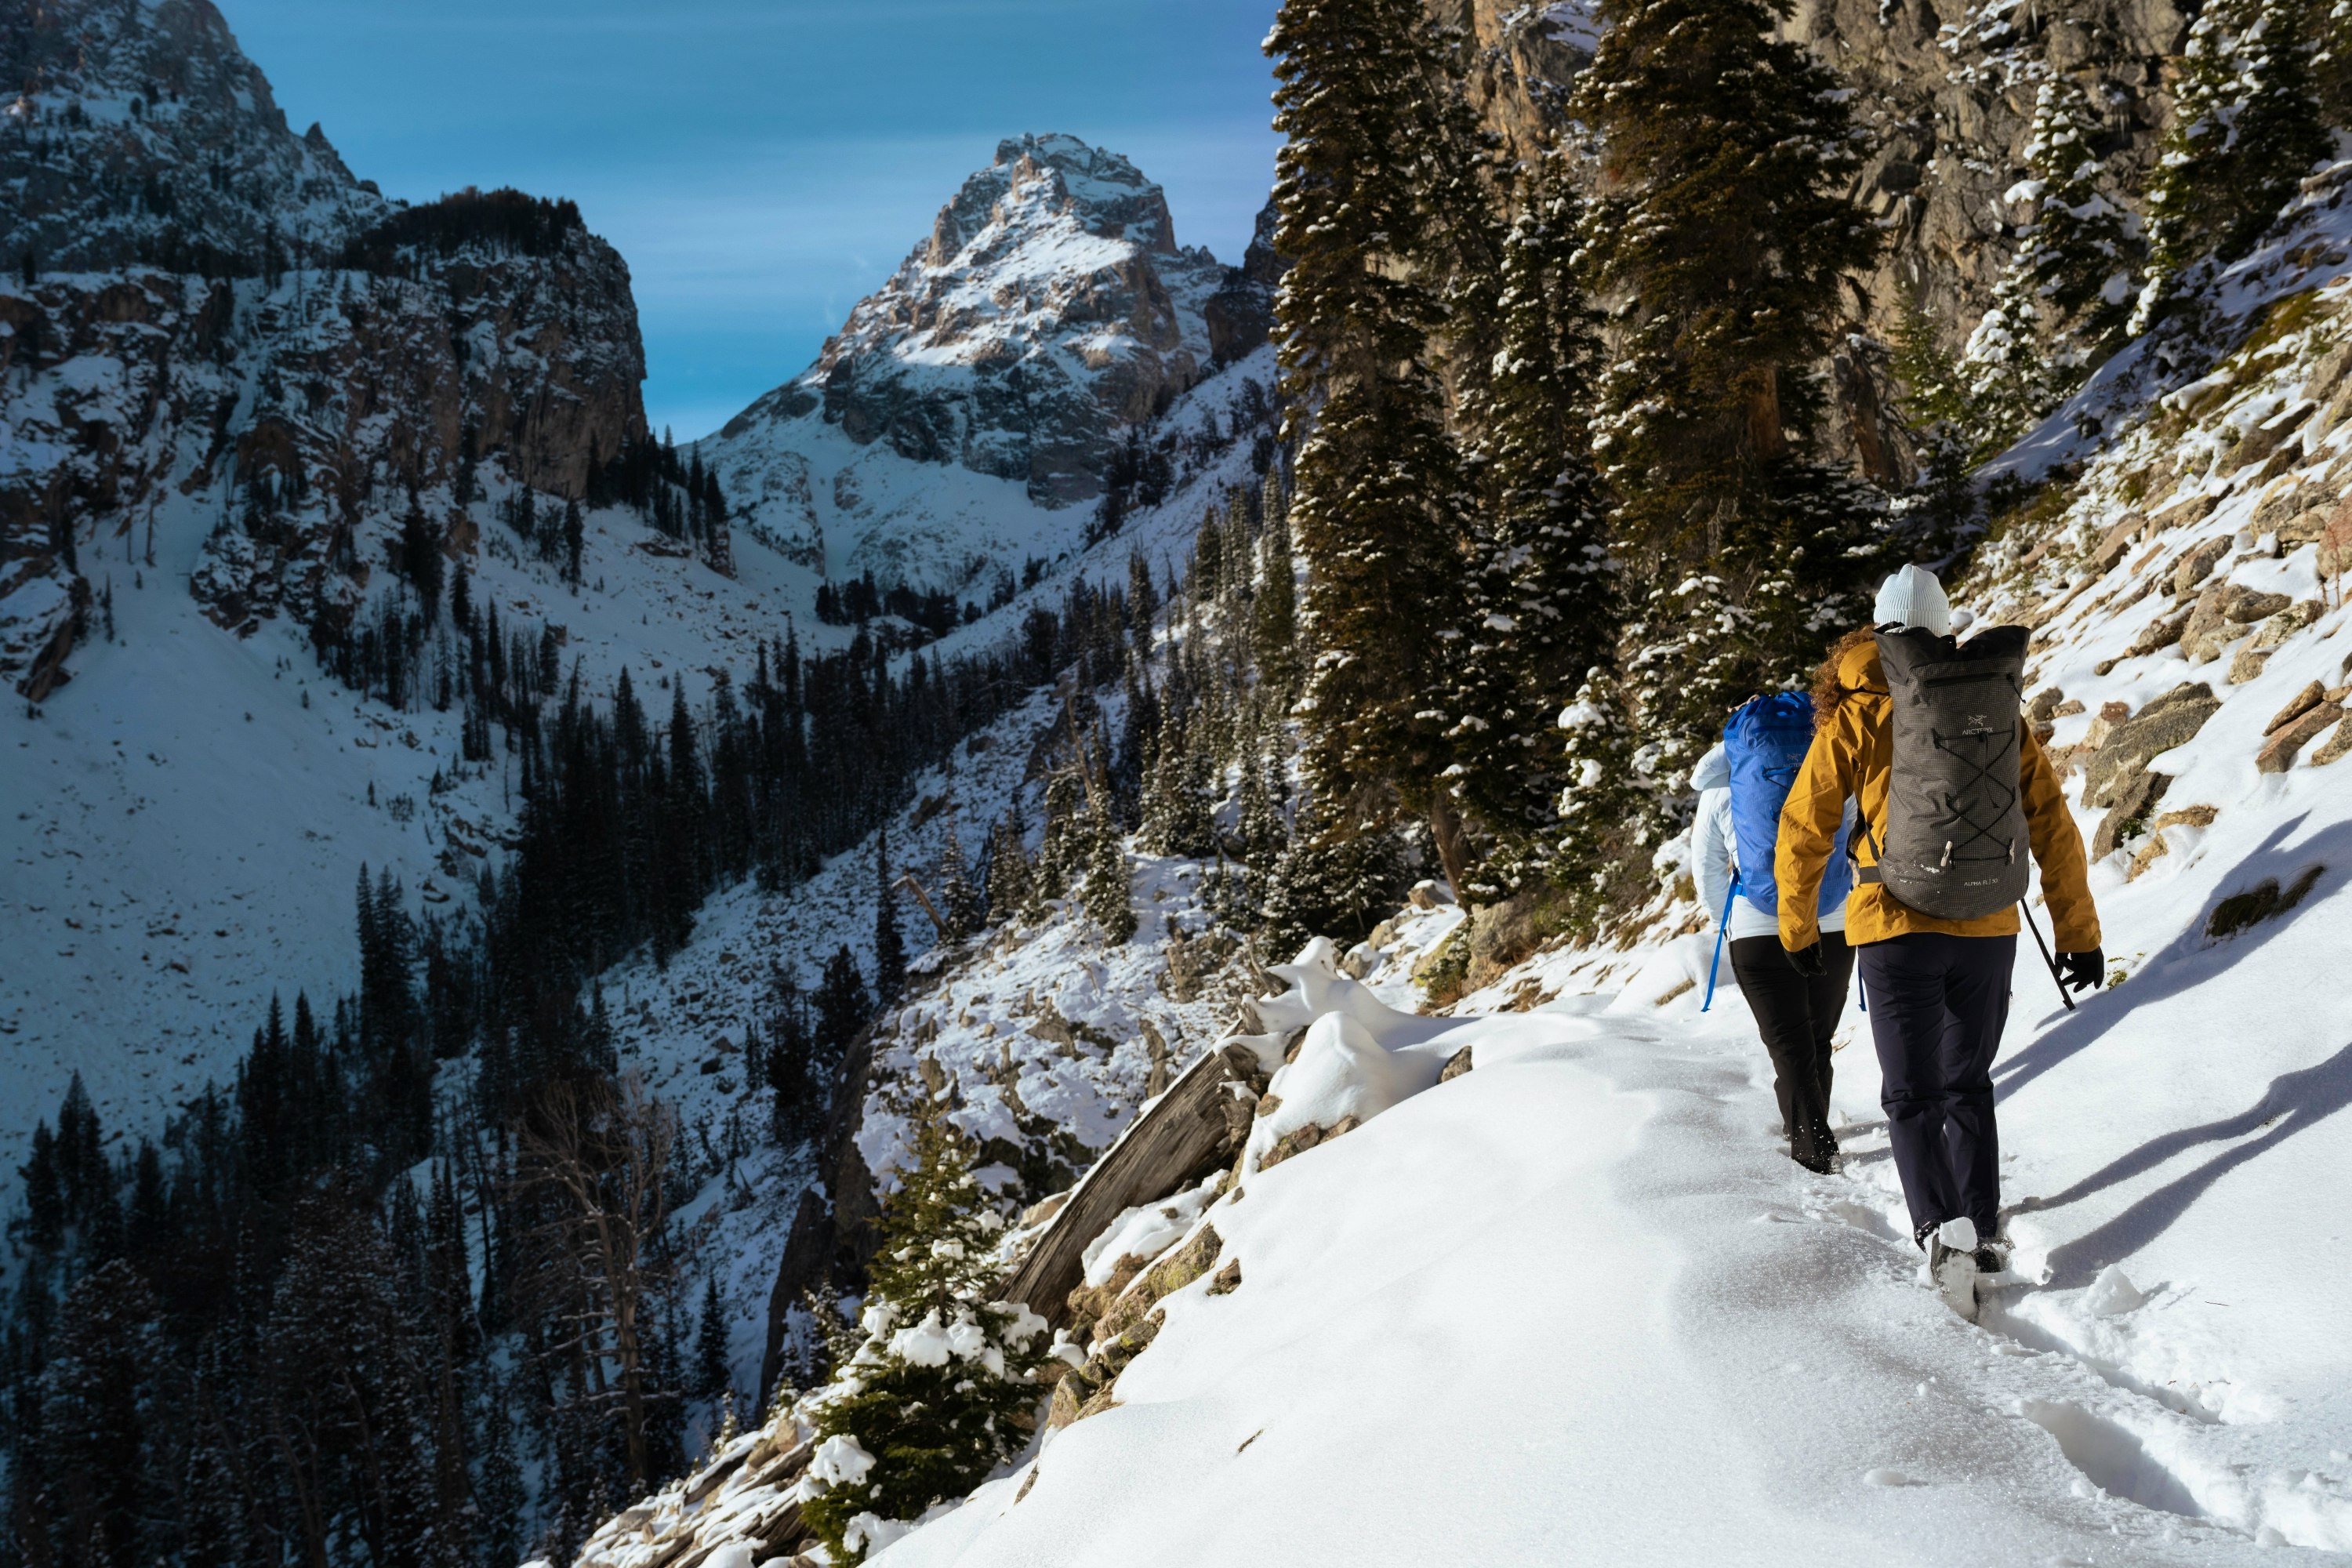 Arc'teryx • Wanderlust Outfitters - Outdoor Clothing, Gear and